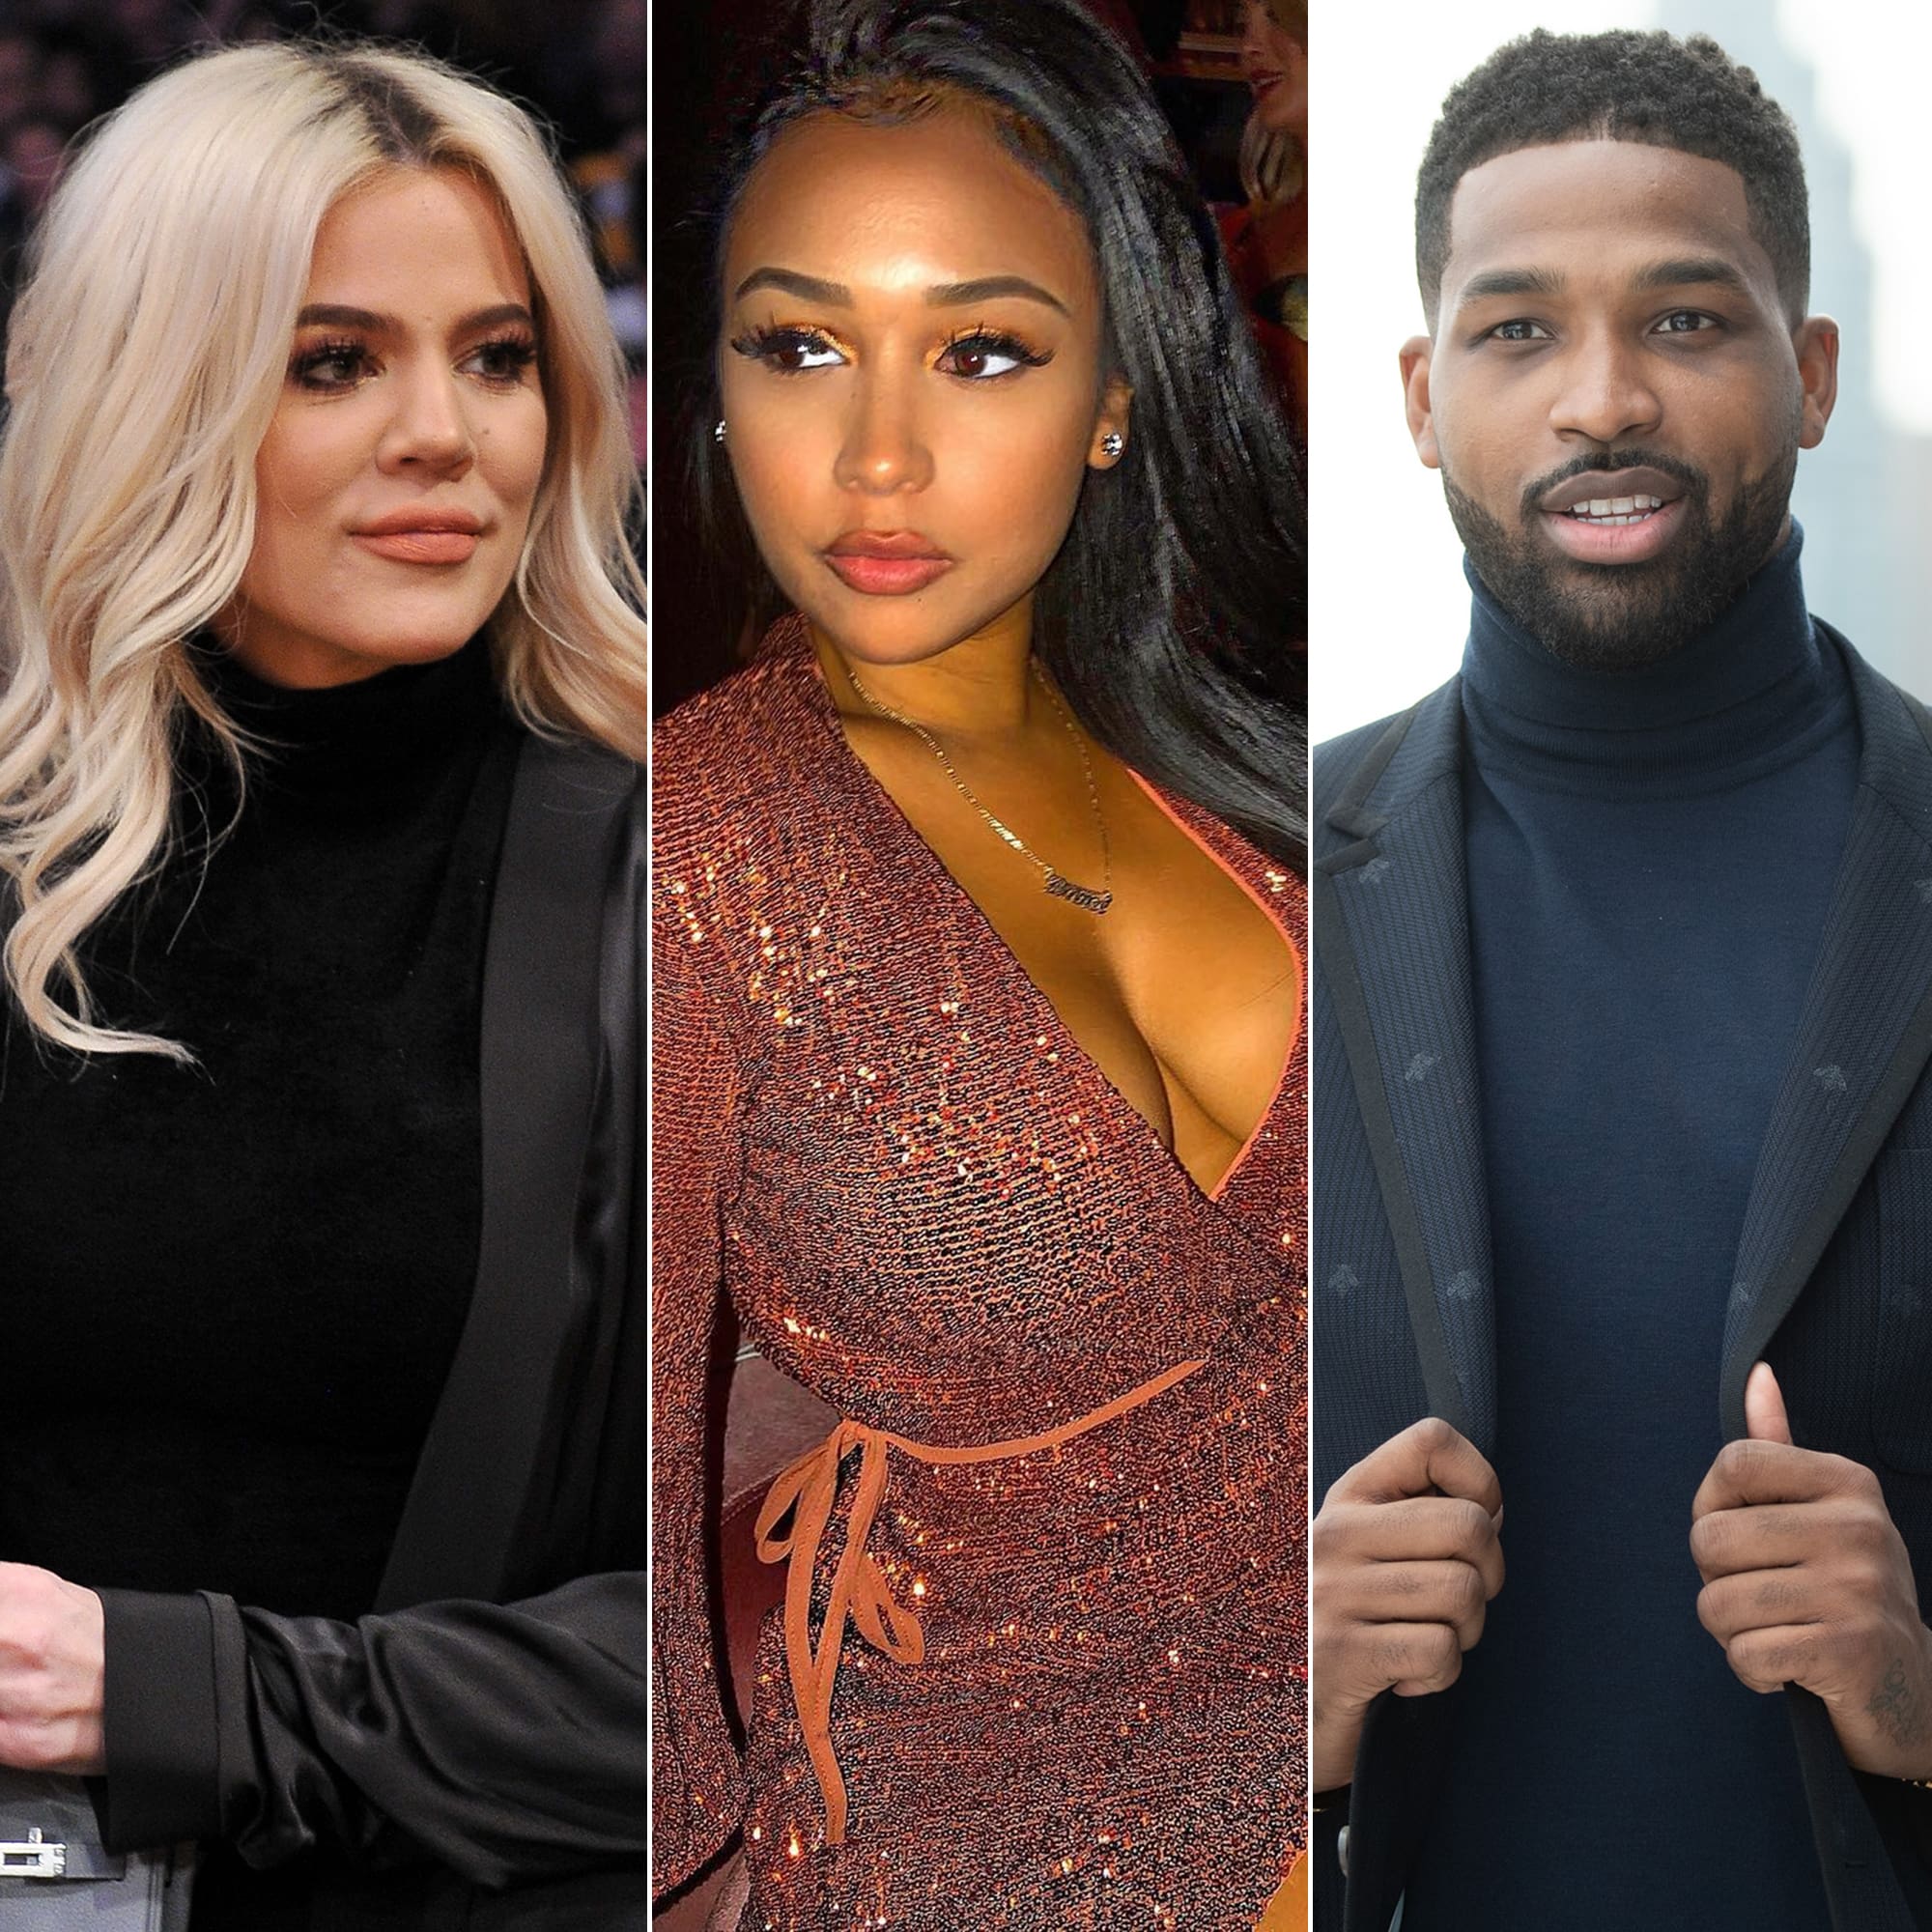 Tristan Thompson Defends And Praises His Baby Mamas, Khloe And Jordan - See What He Has To Say